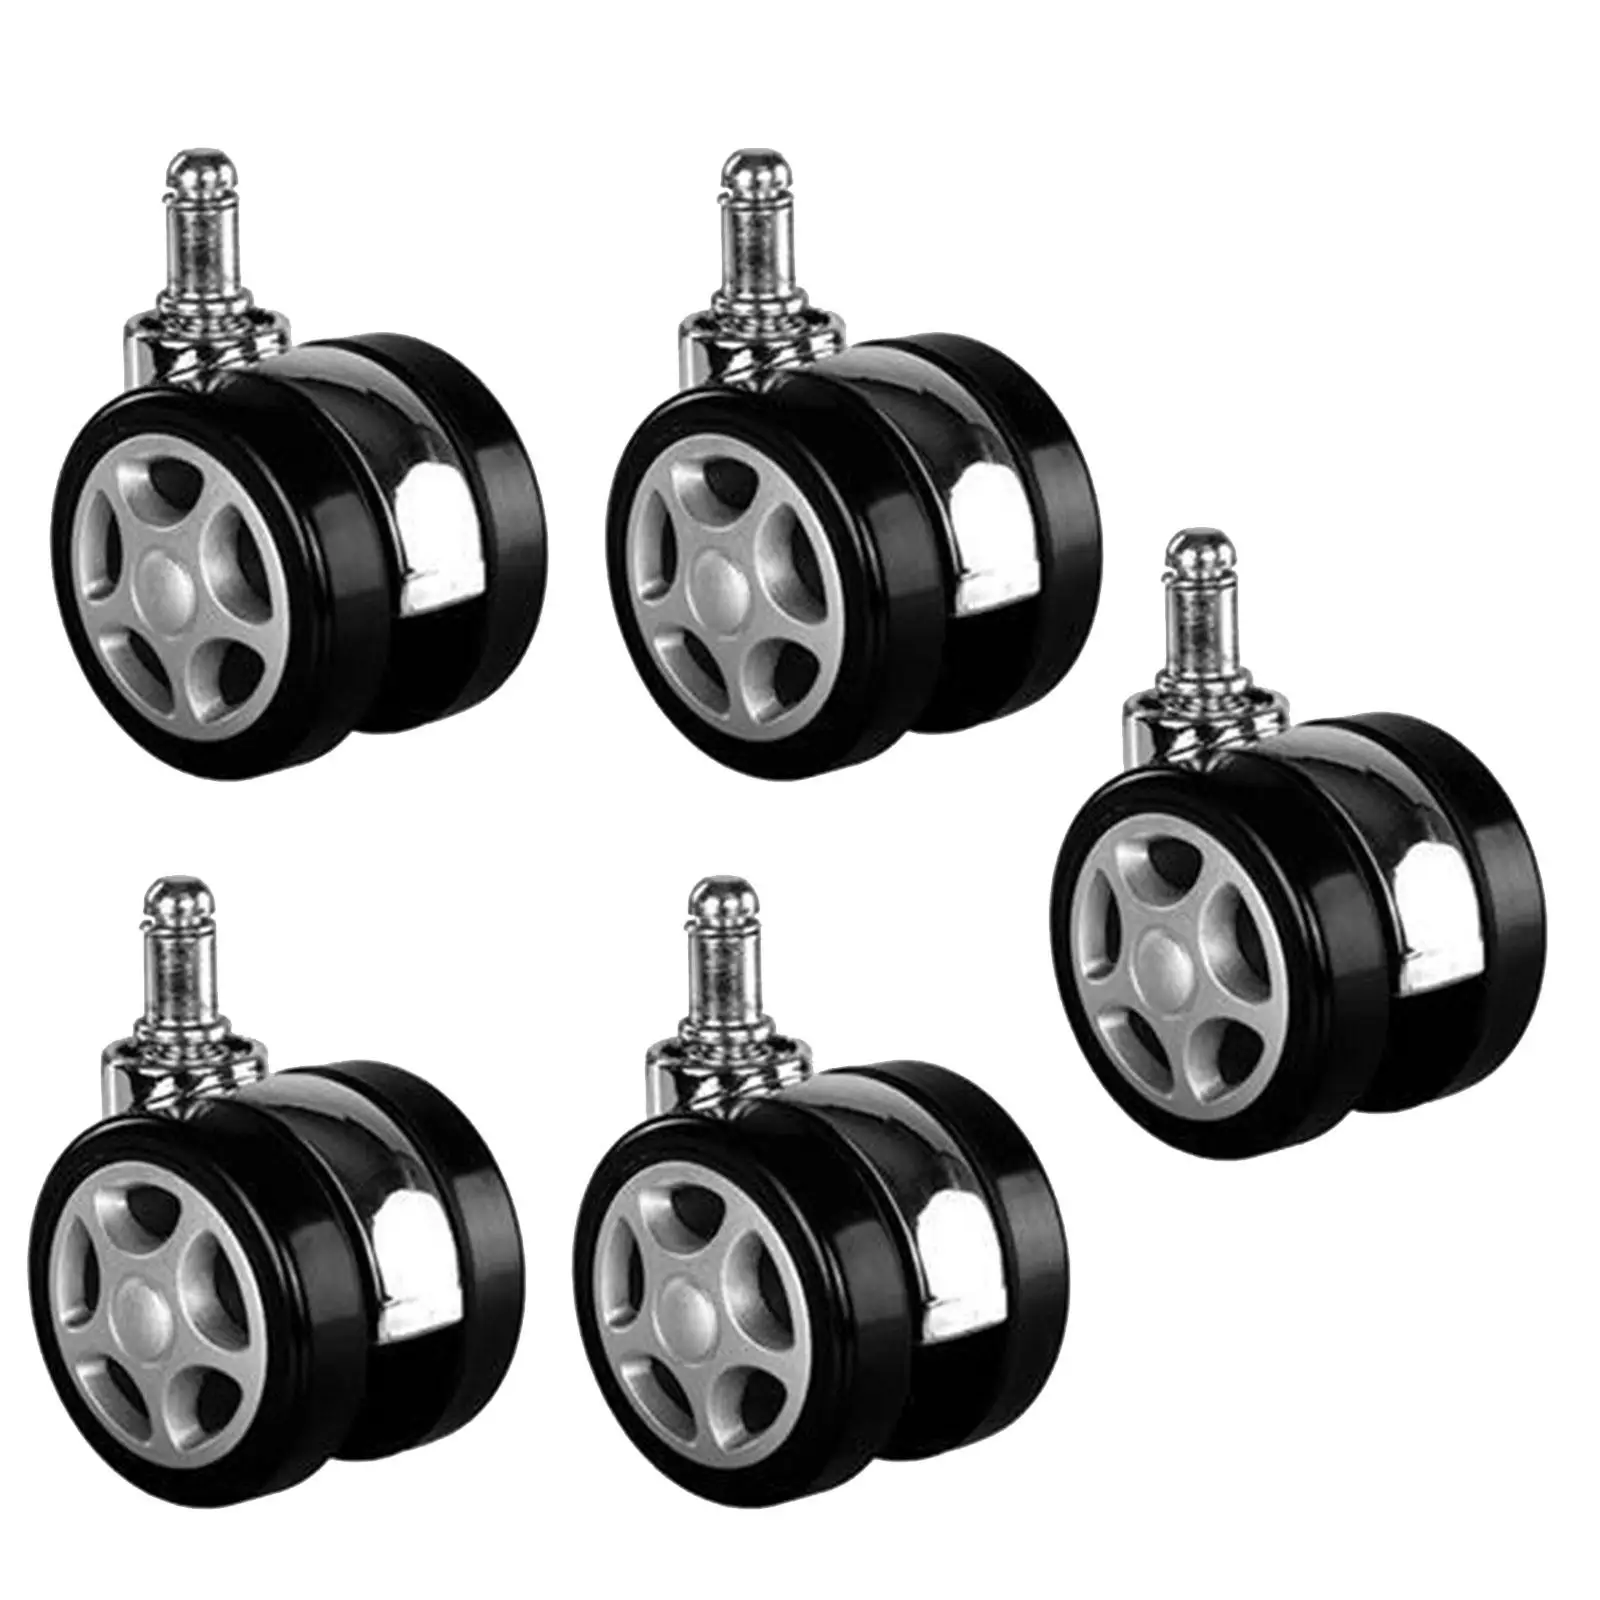 5x Office Chair Wheels Noise Free Universal Wear Resistant Accessories Smooth Gliding Mute 2 inch for Carpet Hardwood Floor